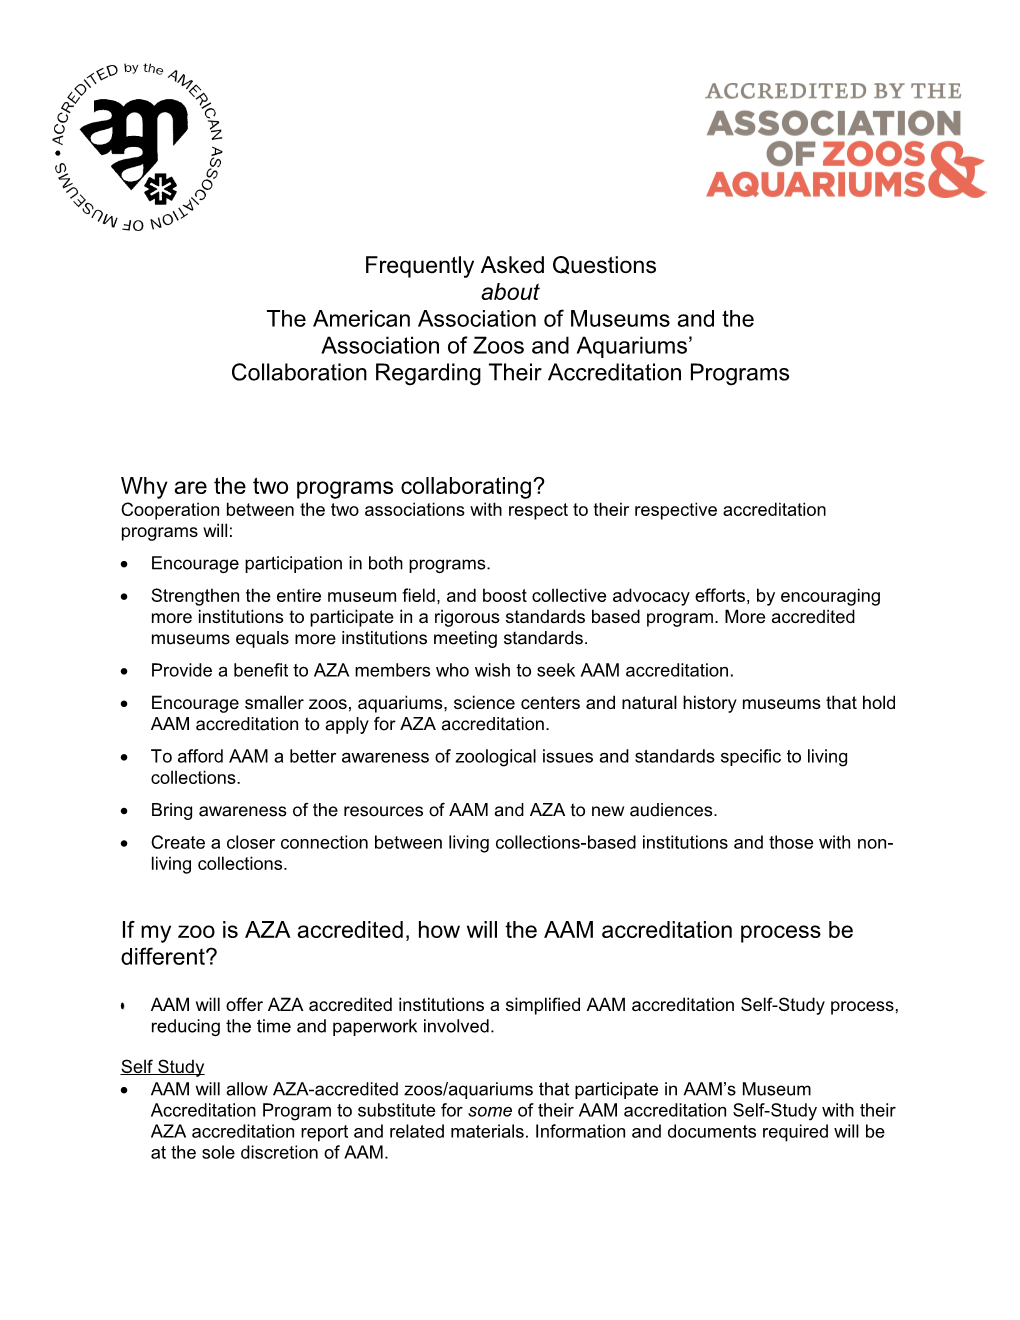 Association of Zoos and Aquariaums (AZA) Statement of Support and Collaboration with The